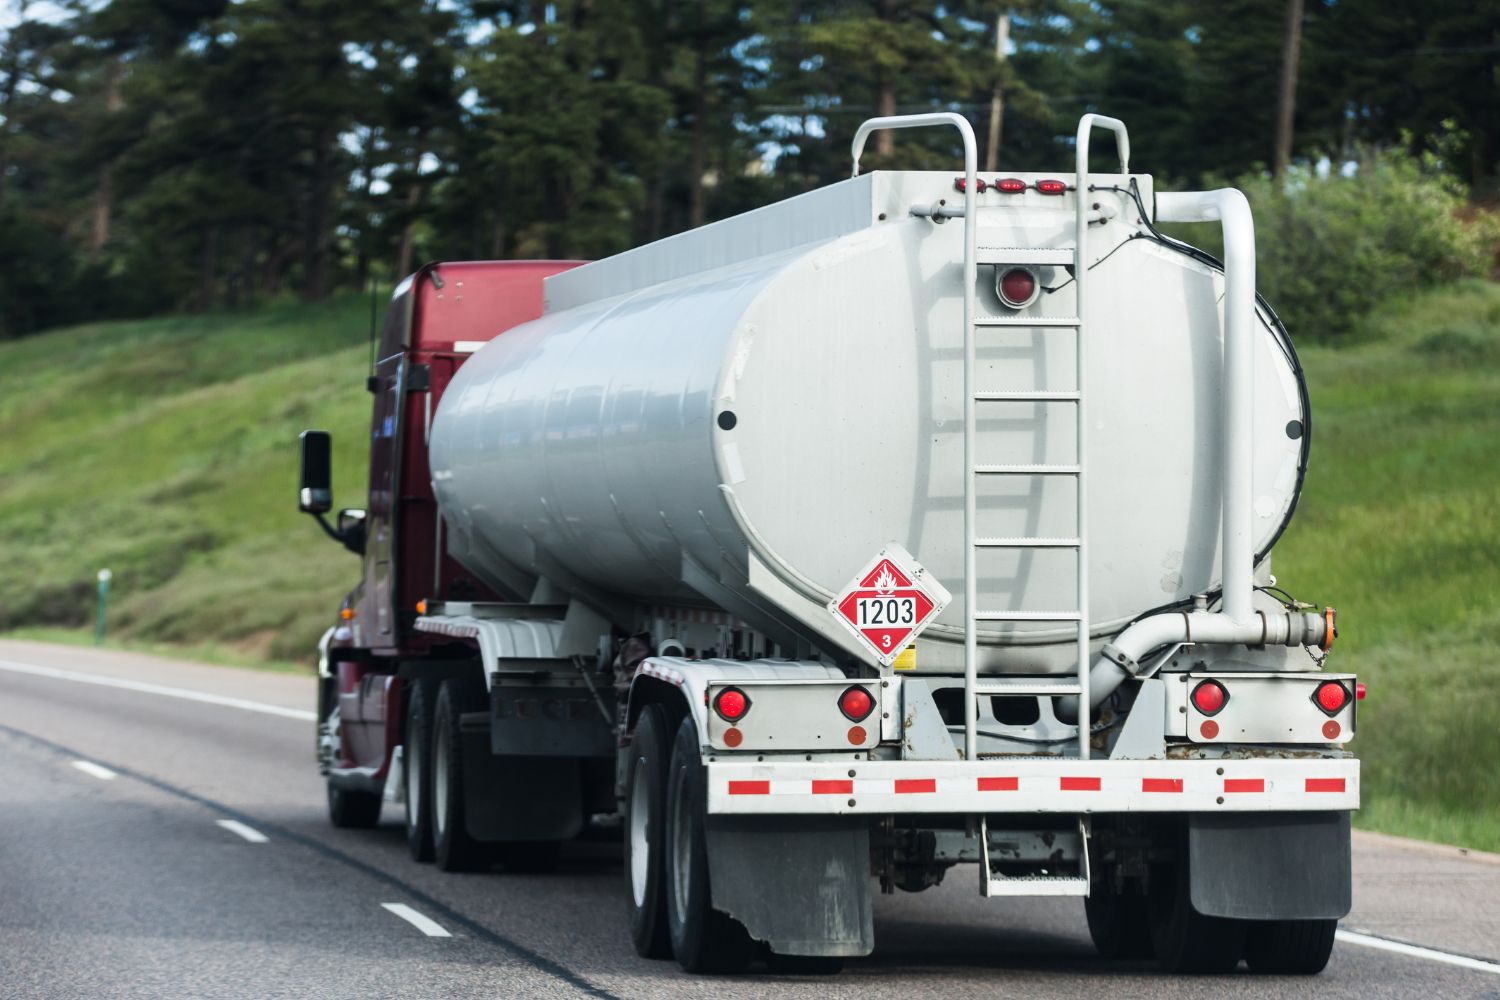  Image of a Tanker Truck from the back while its driving down a road